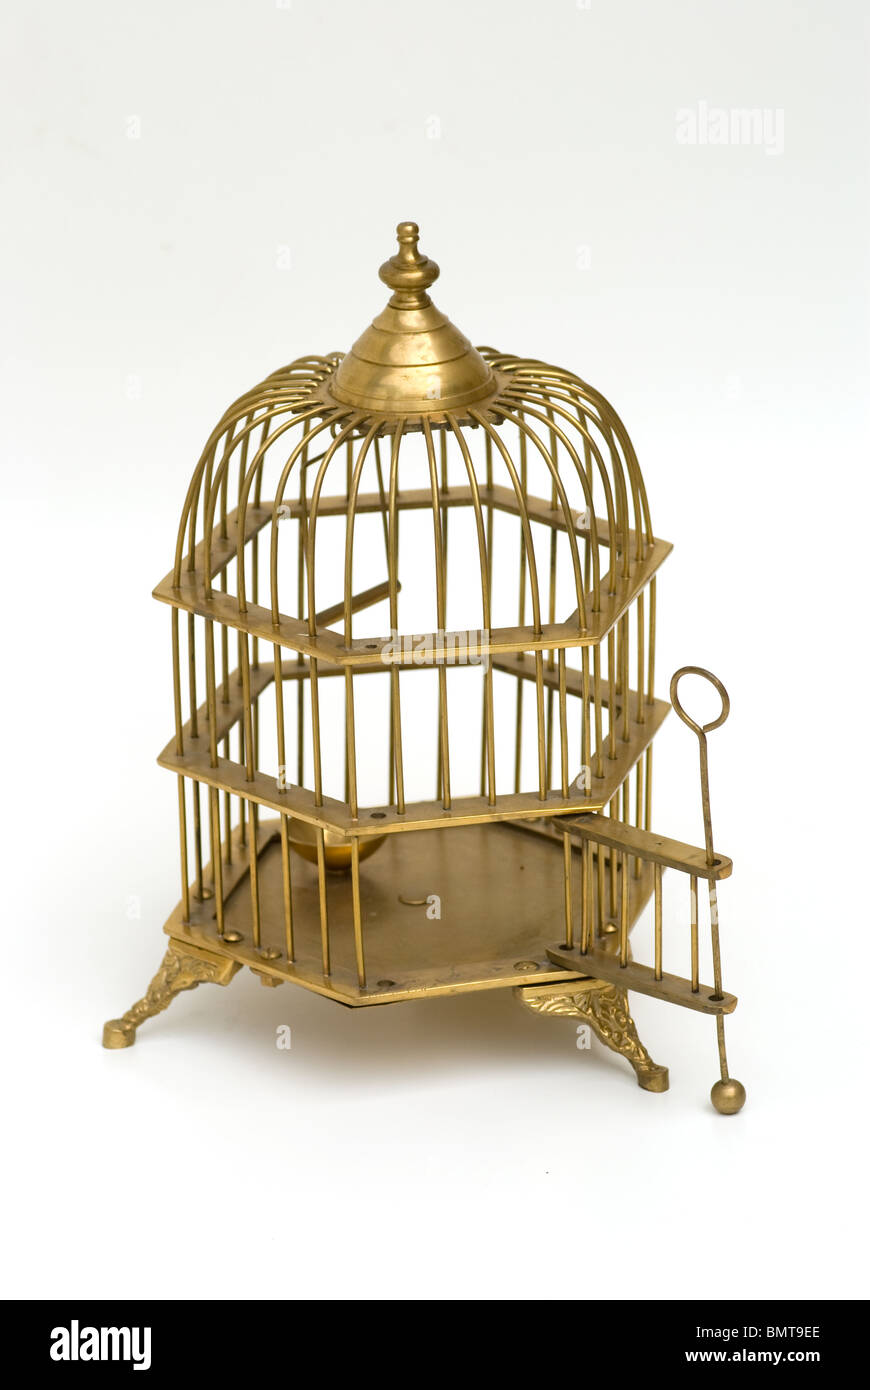 Ornate vintage brass bird cage with open door Stock Photo - Alamy